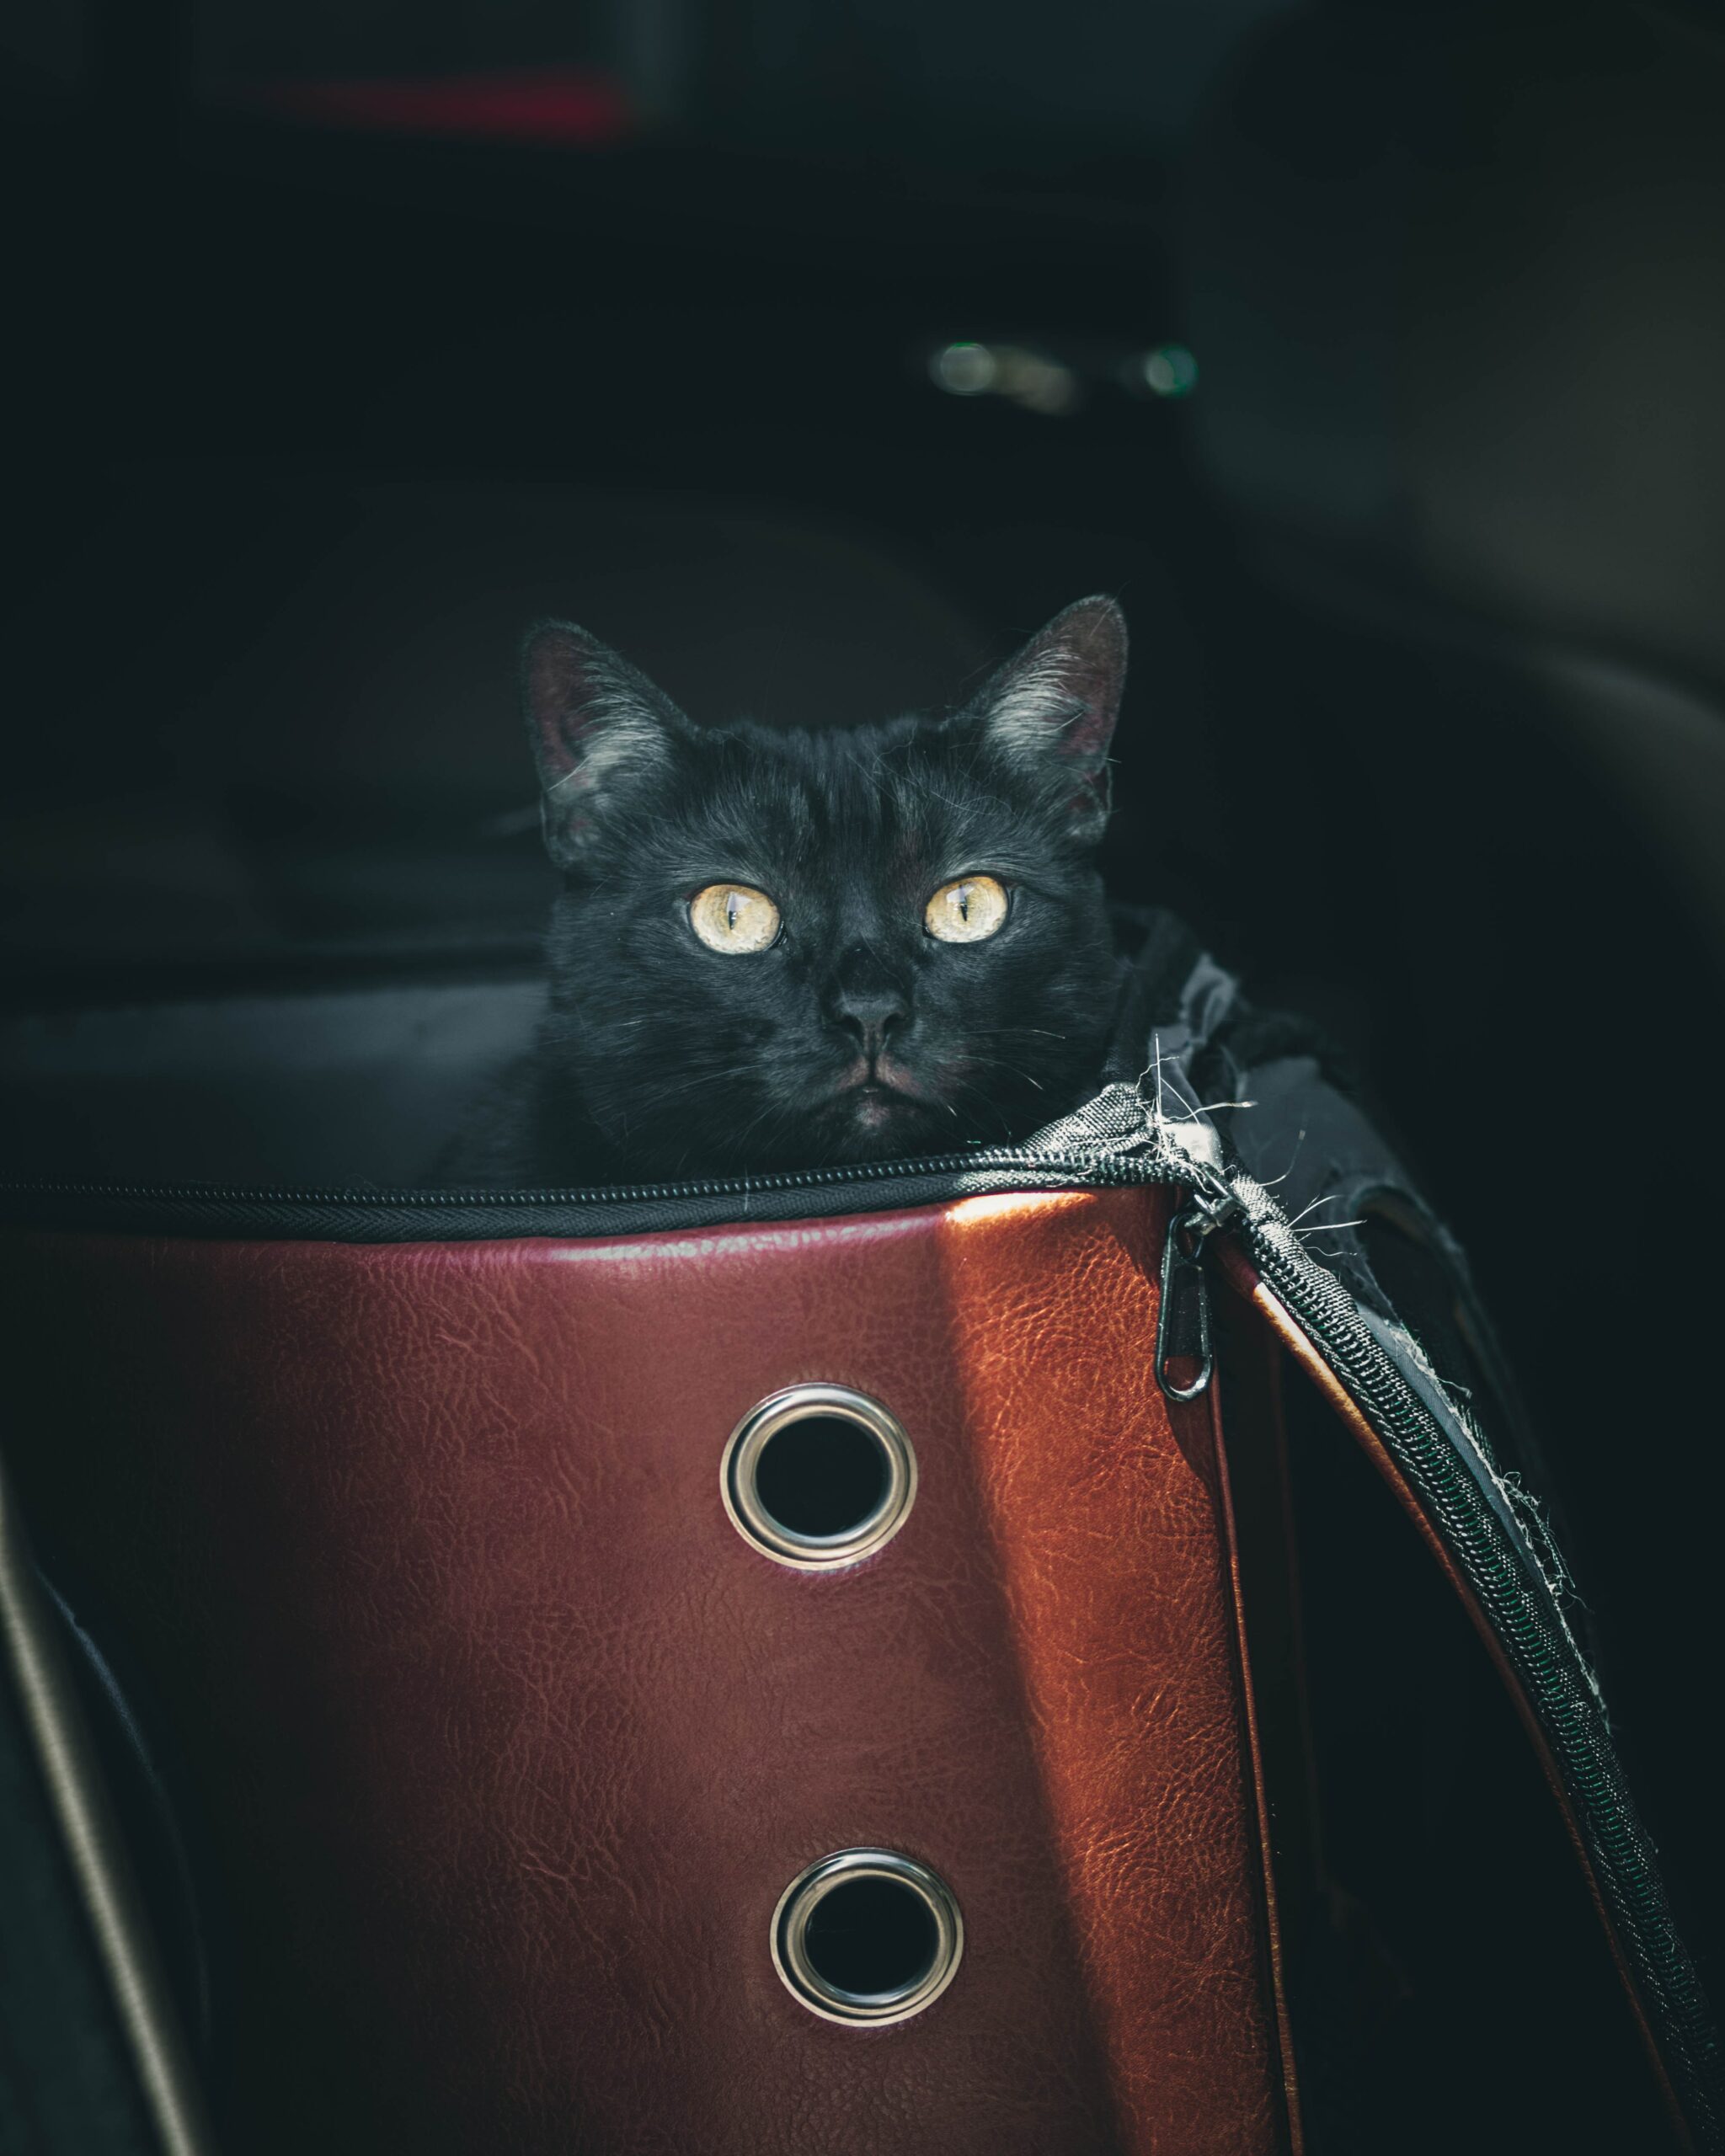 Know These Things Before Traveling With Your Cat